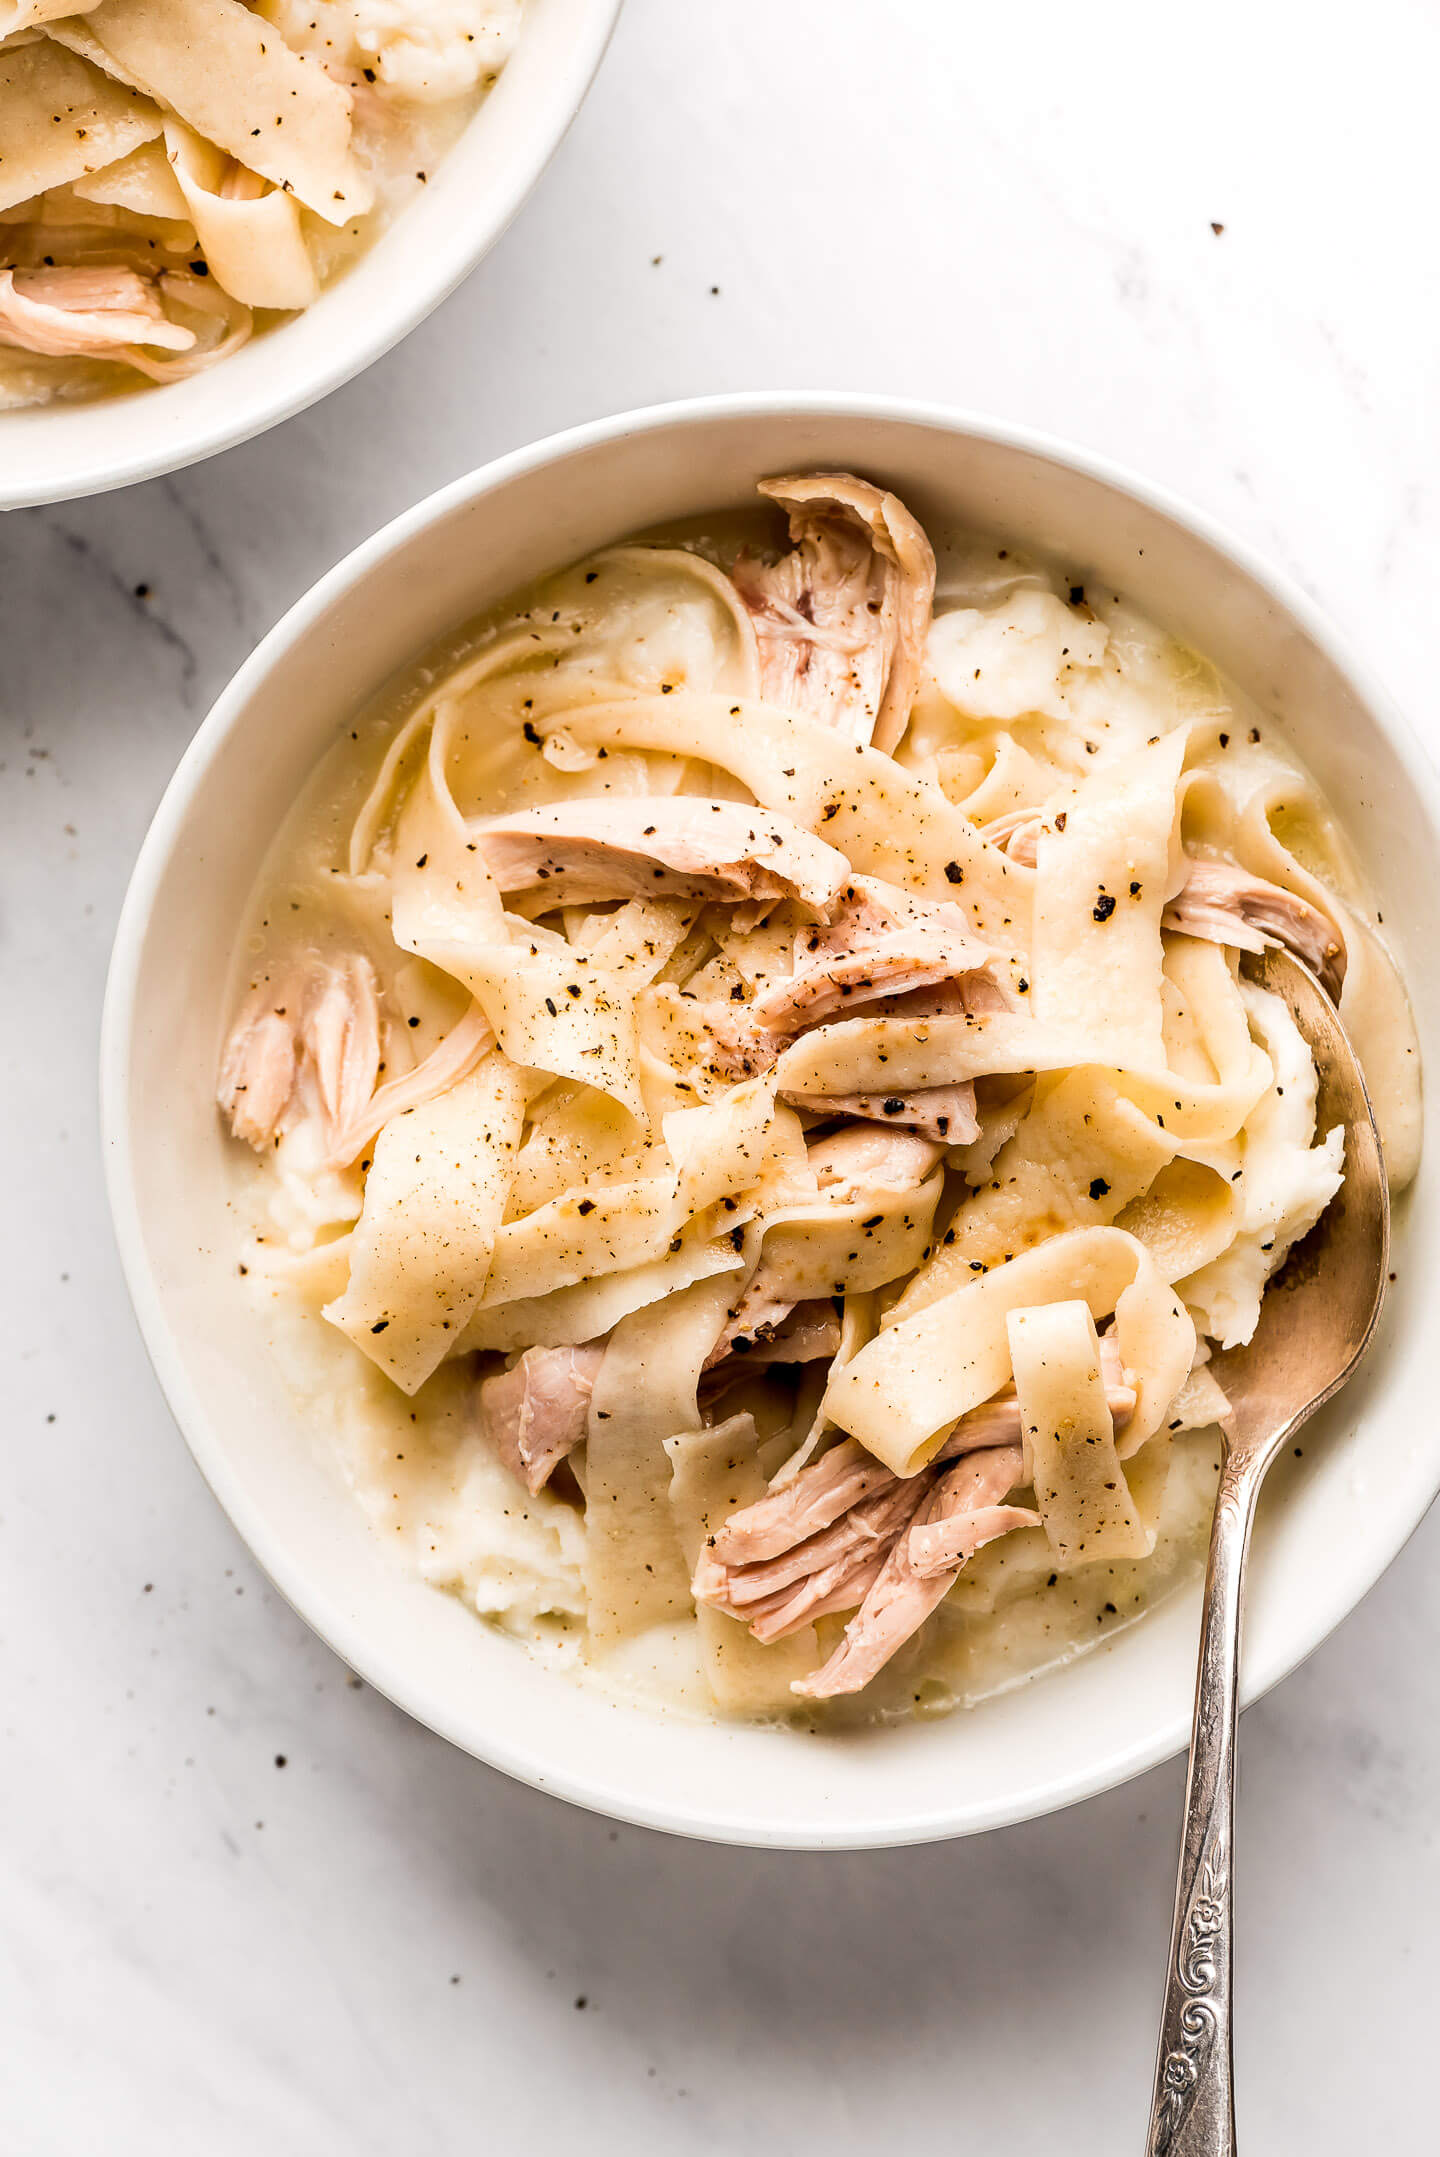 A bowl of Amish Chicken and Noodles over mashed potatoes.